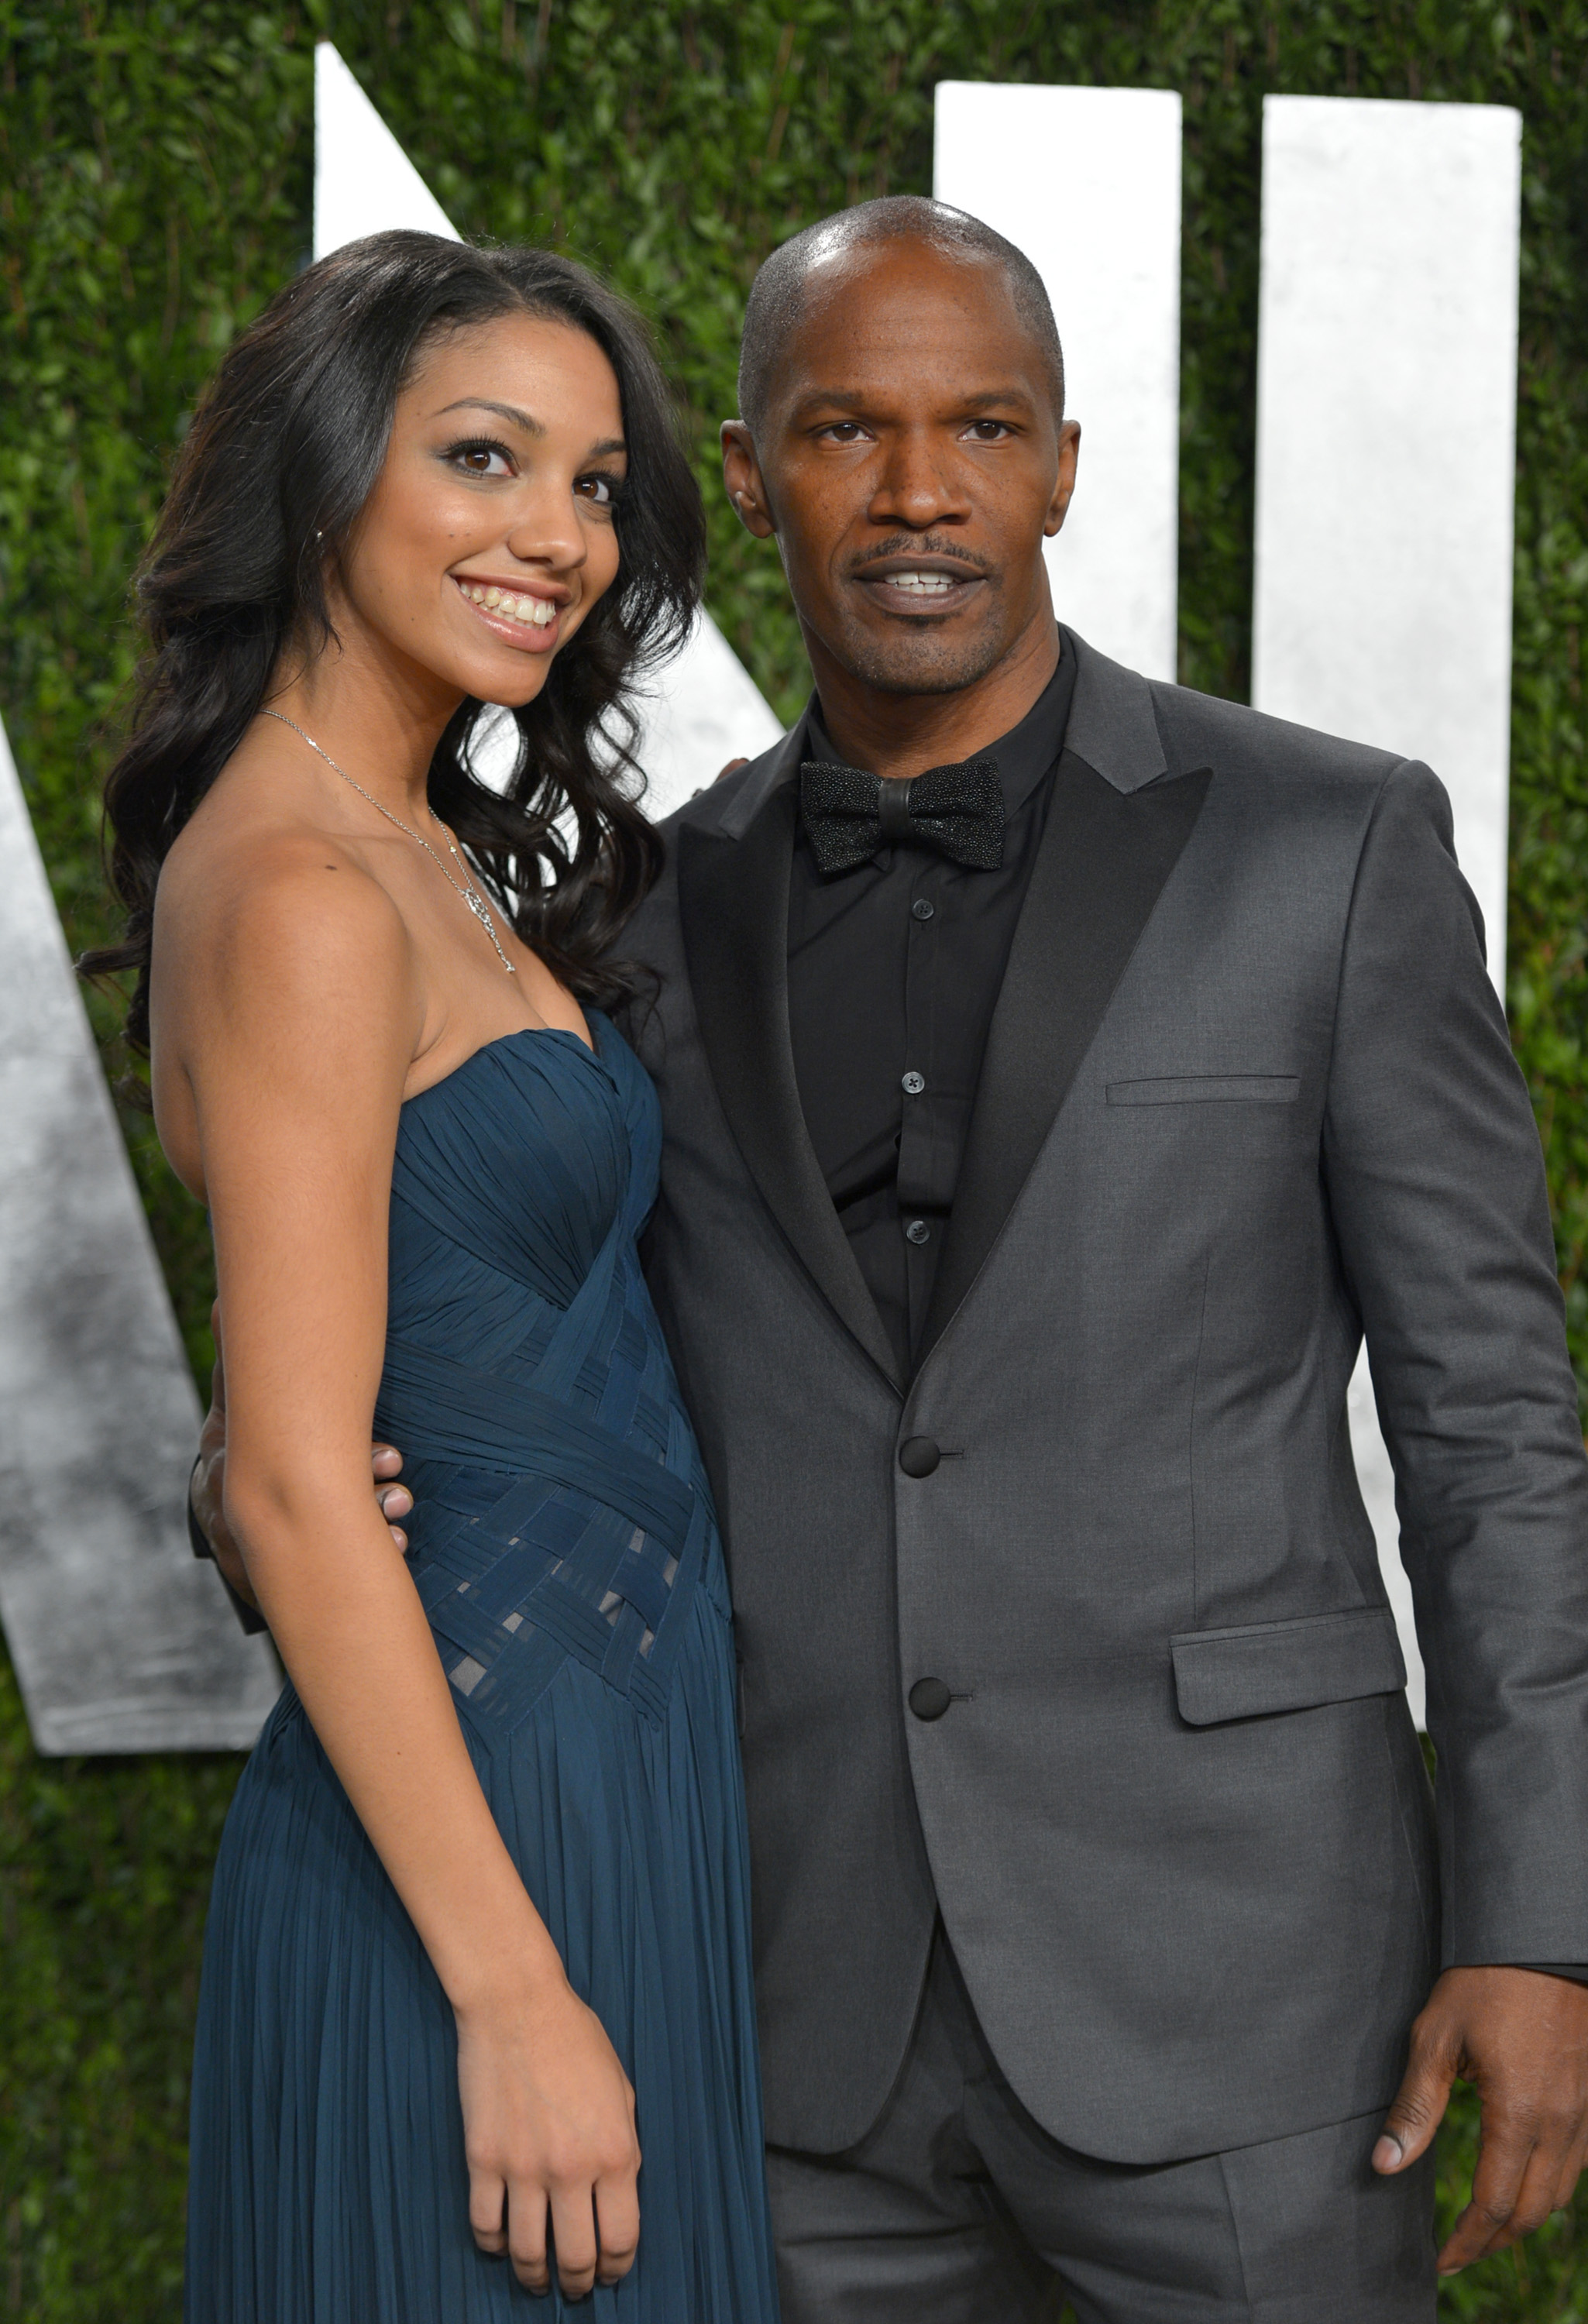 Jamie Foxx and his daughter Corinne Foxx in Los Angeles in 2013 | Source: Getty Images